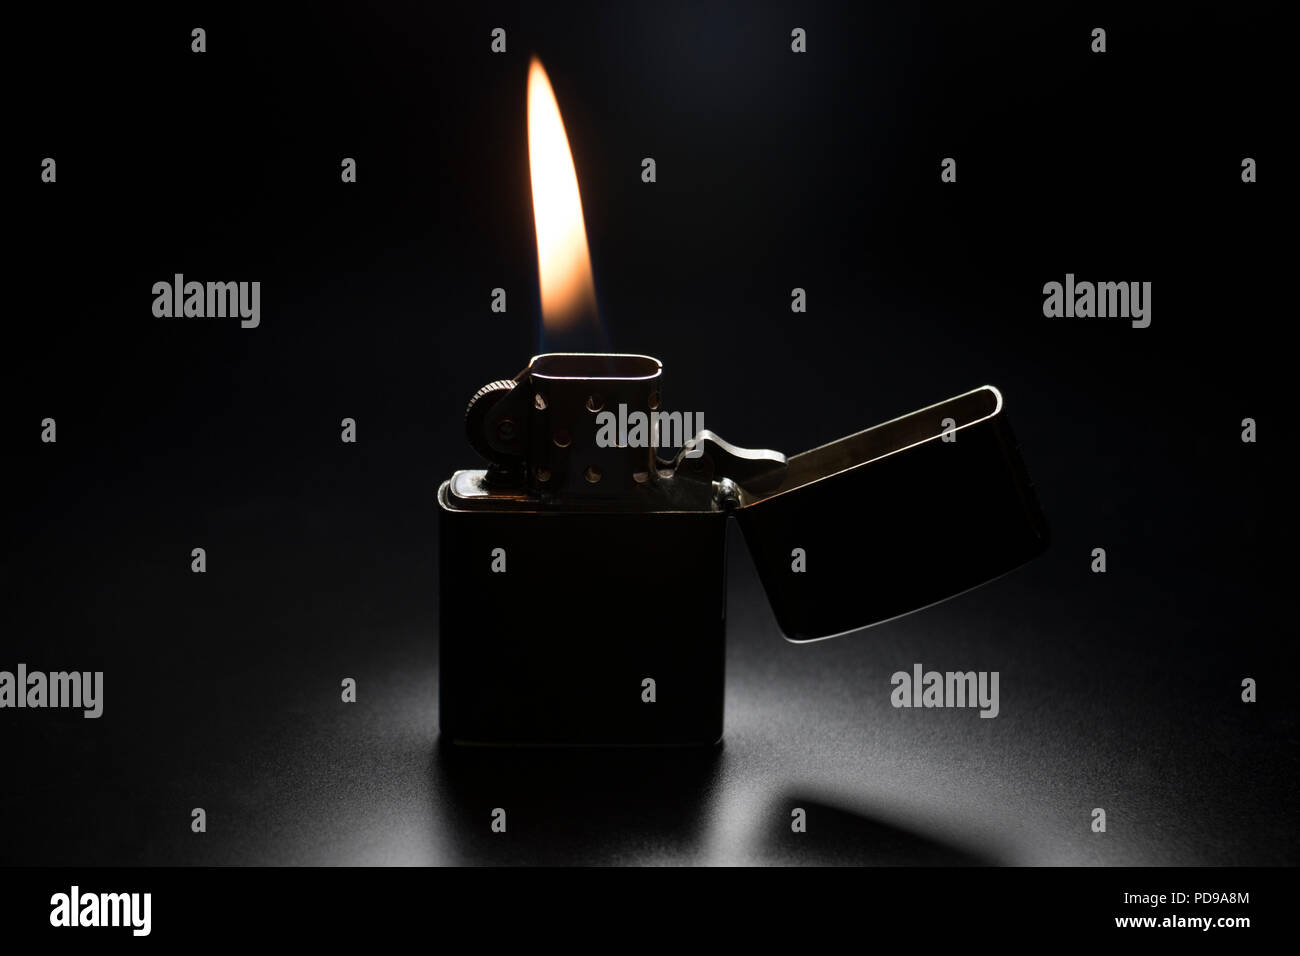 Lighter lit with yellow flame on black background. Vintage stainless steel cigarette lighter with spring flip lid. Stock Photo